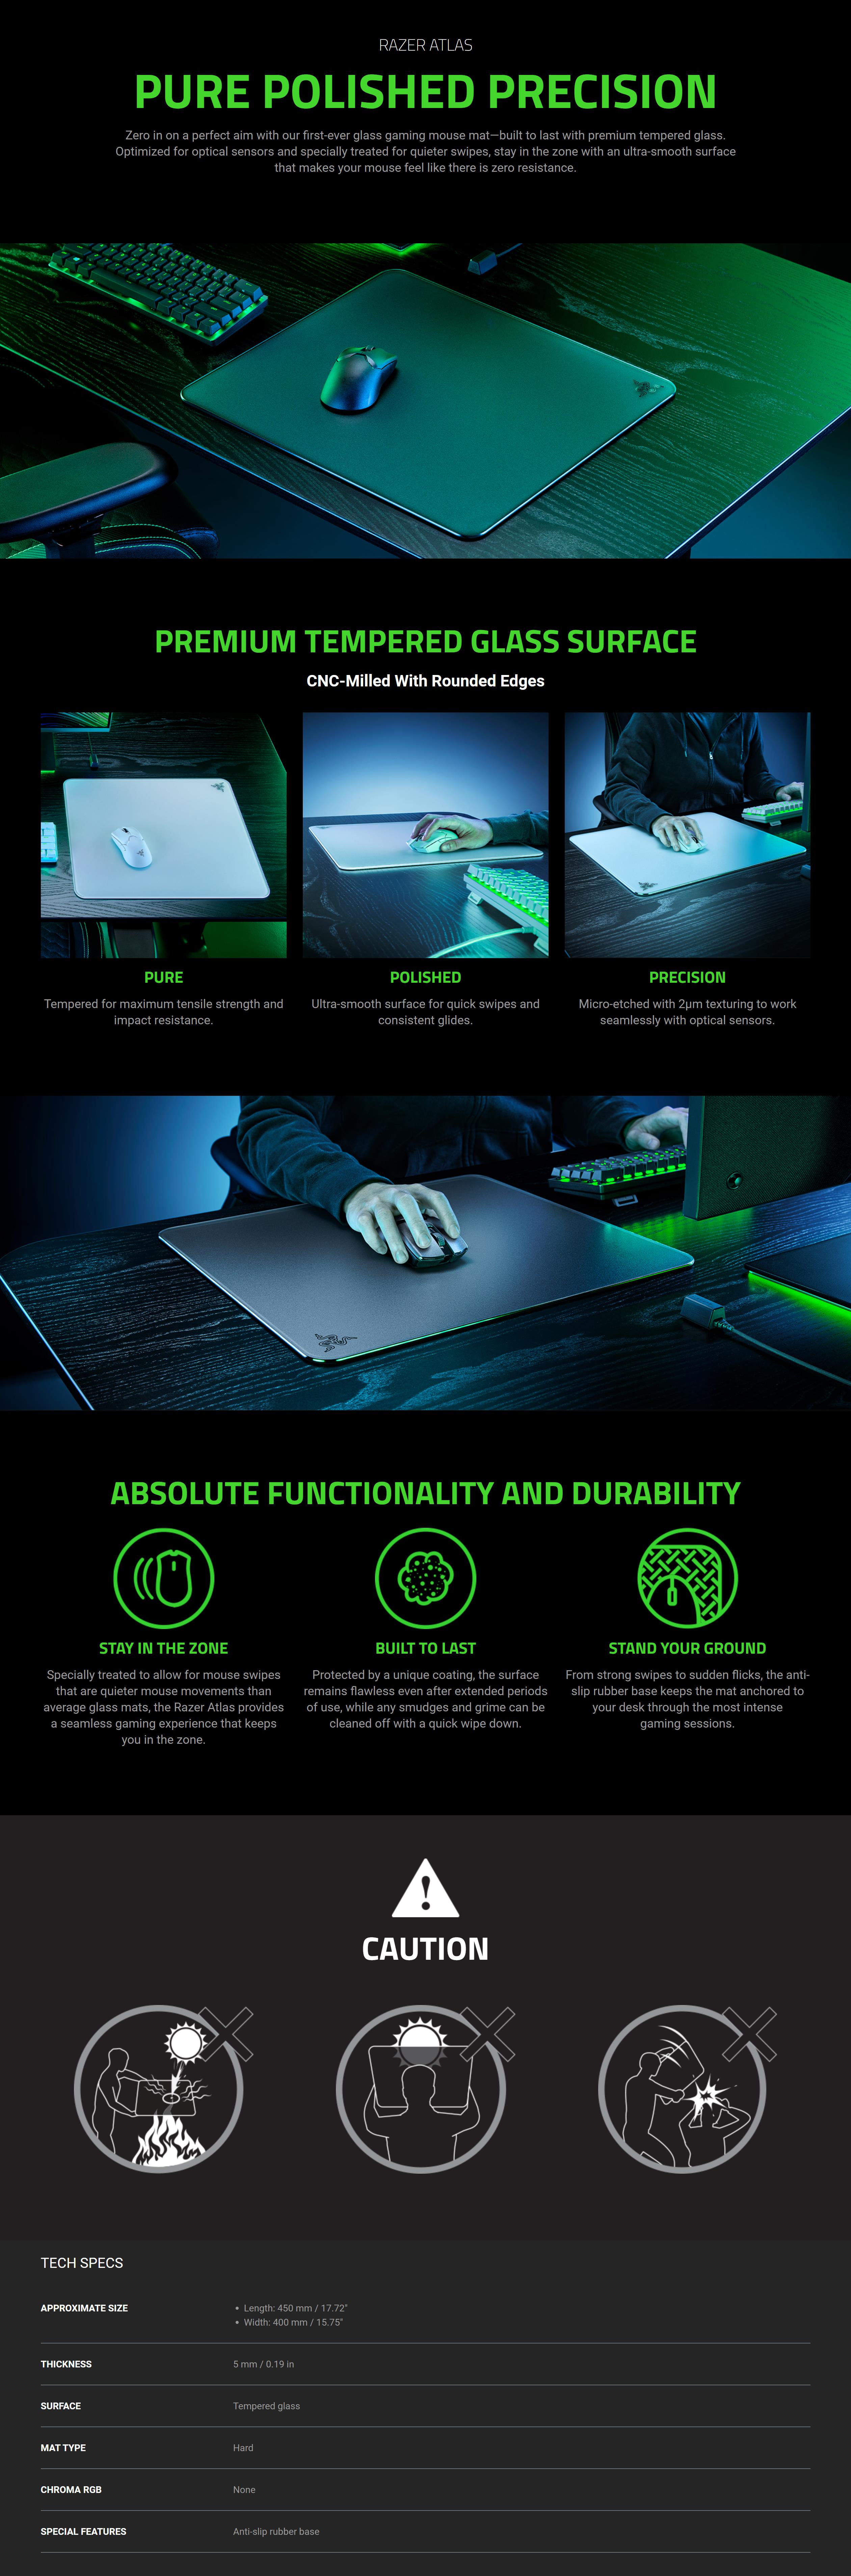 A large marketing image providing additional information about the product Razer Atlas - Premium Tempered Glass Mat (White) - Additional alt info not provided